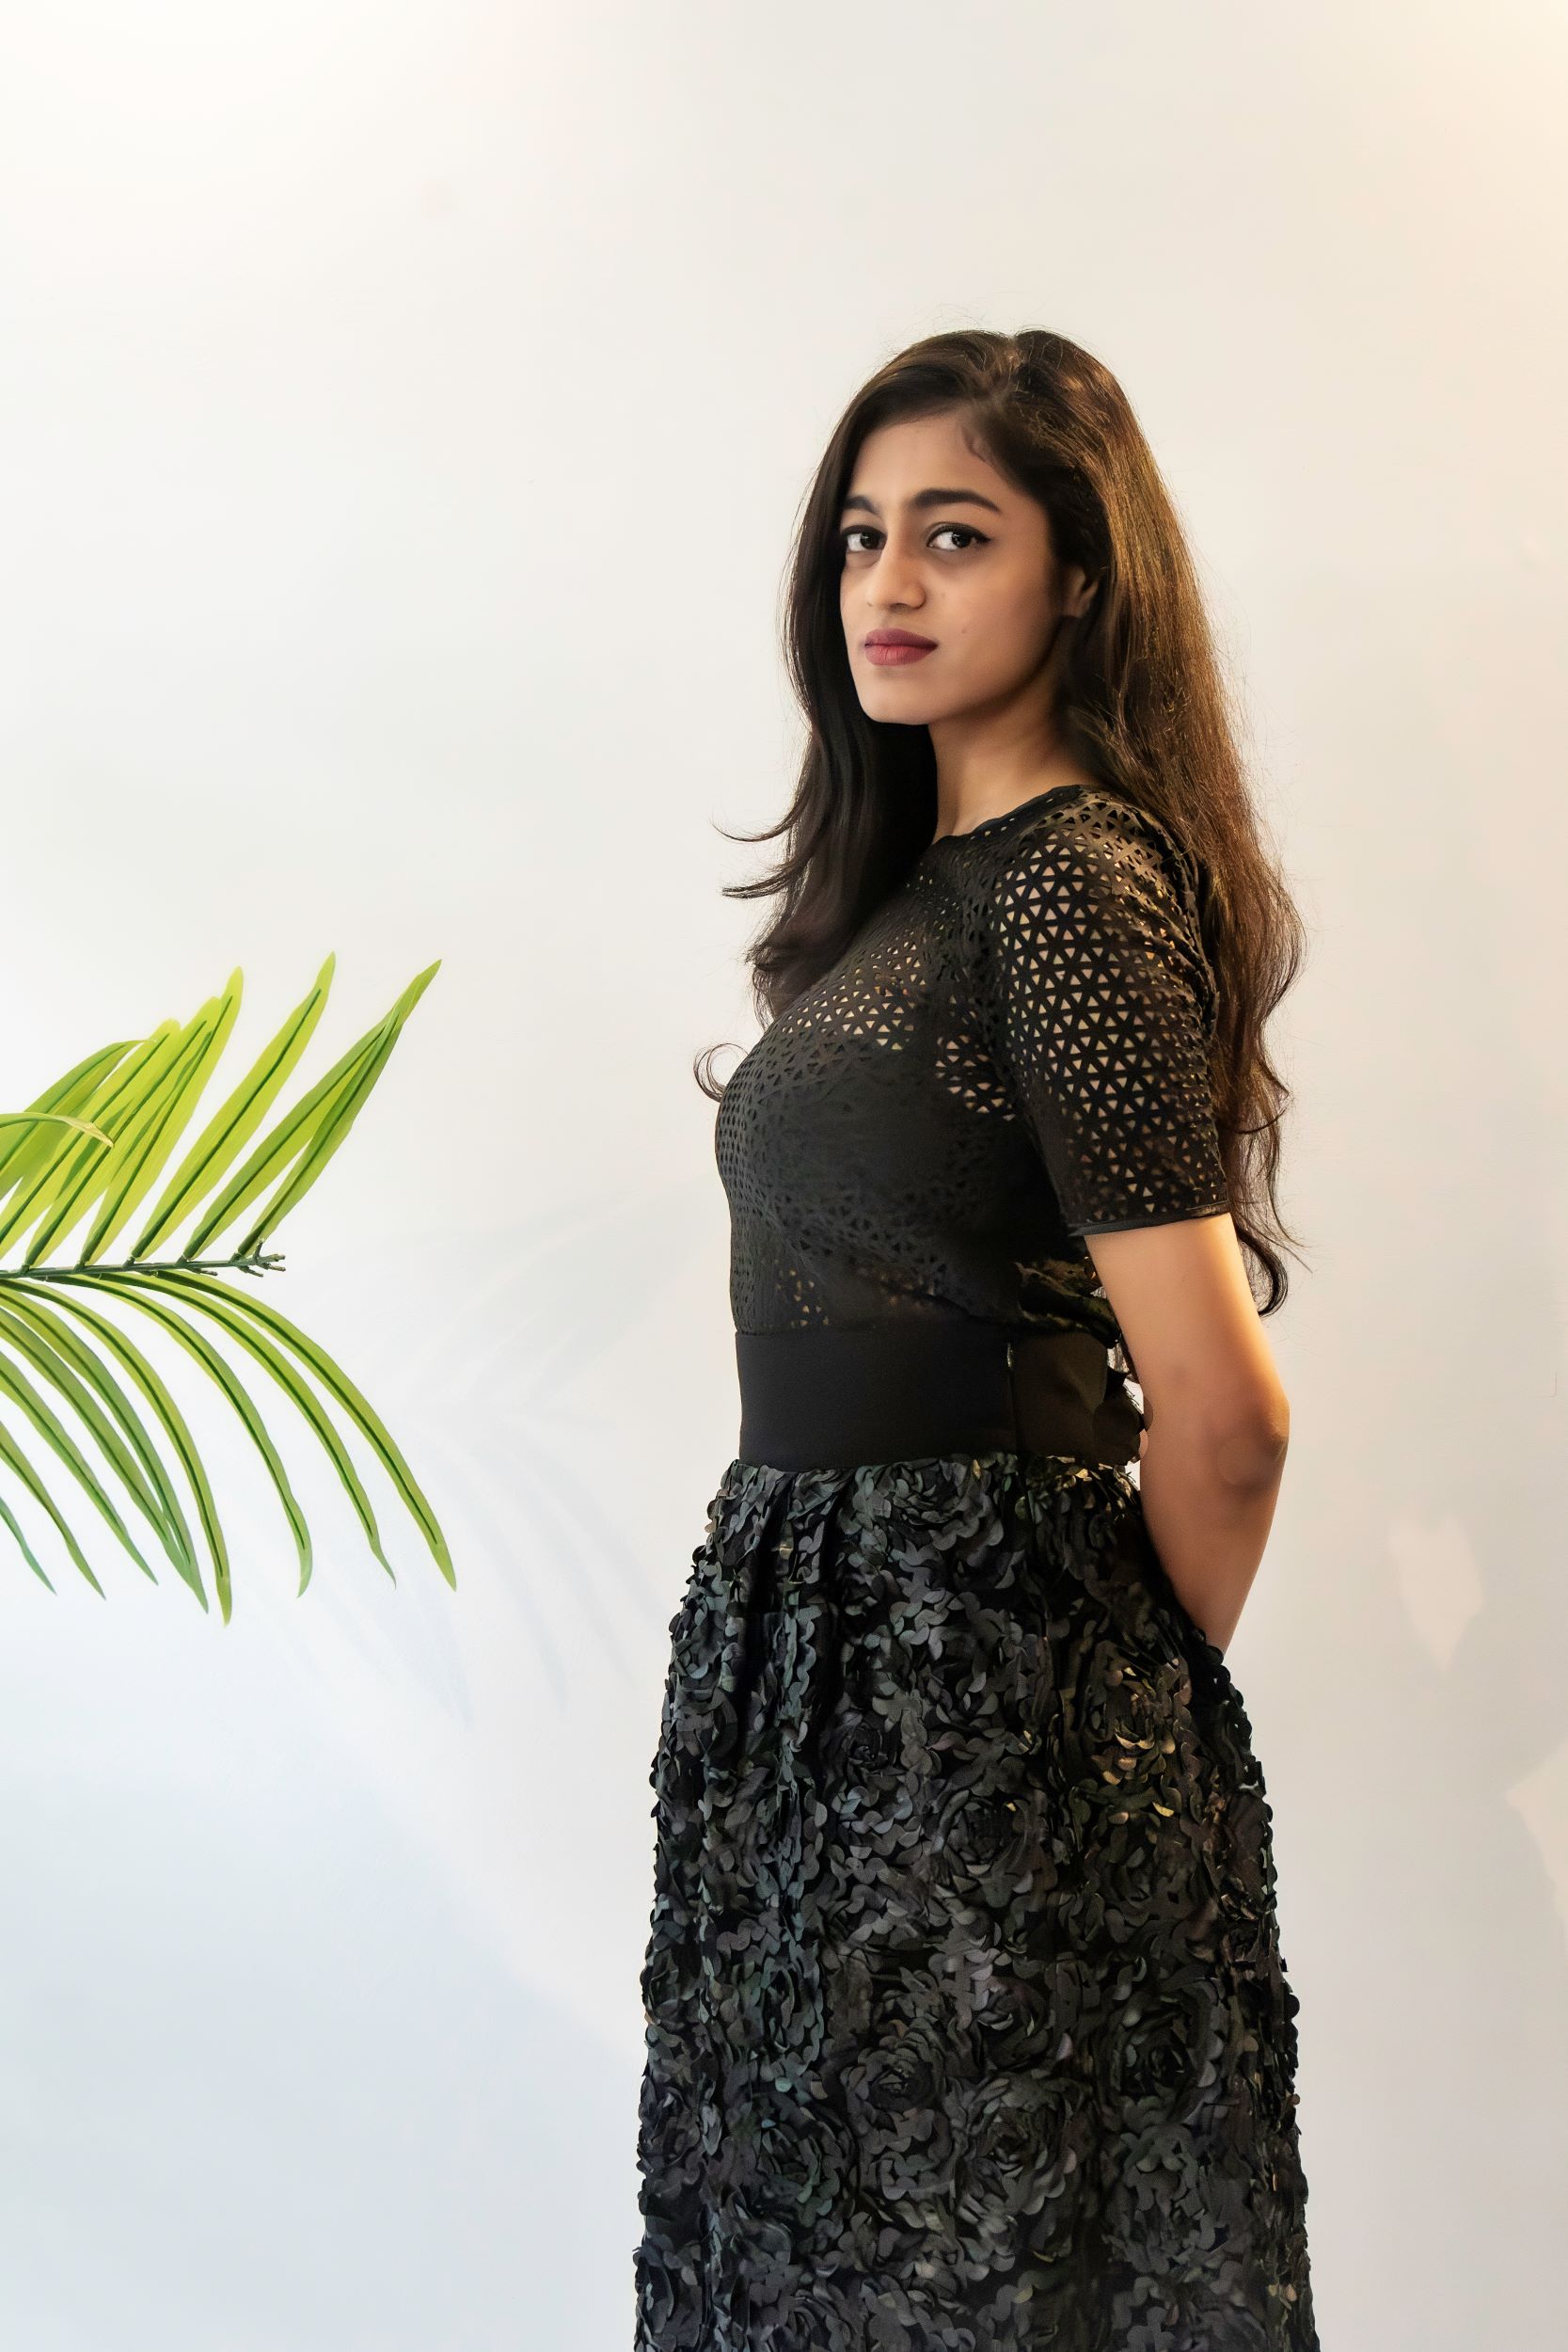 black leather midi skirt with embroidery roses- a beautiful, confident woman.